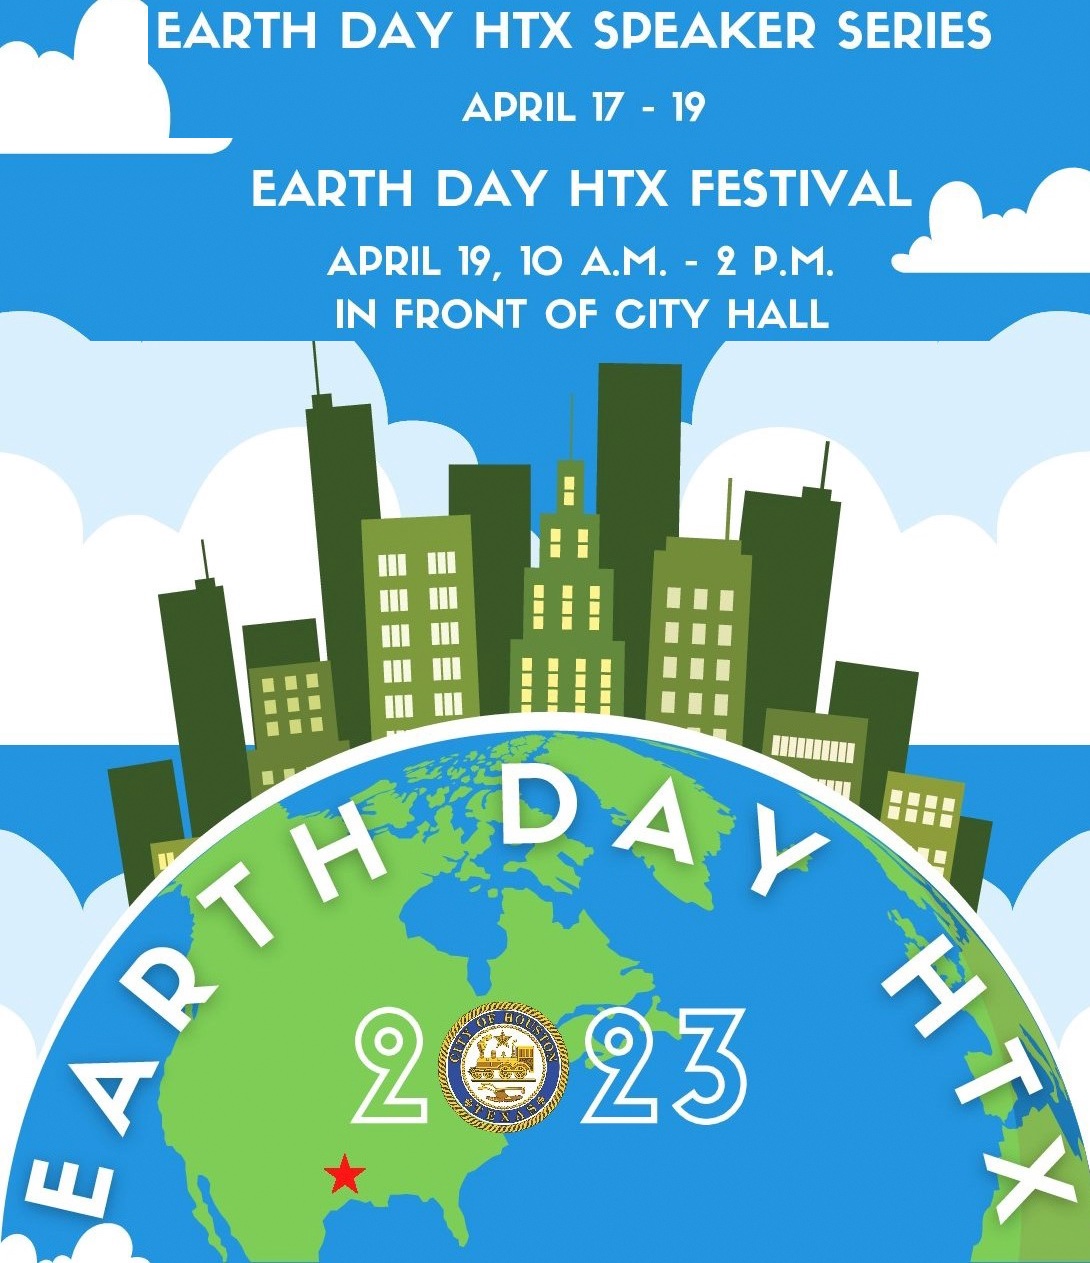 State of Texas Alliance for Recycling Houston Earth Day Festival April 17-19 Speaker Series City Hall